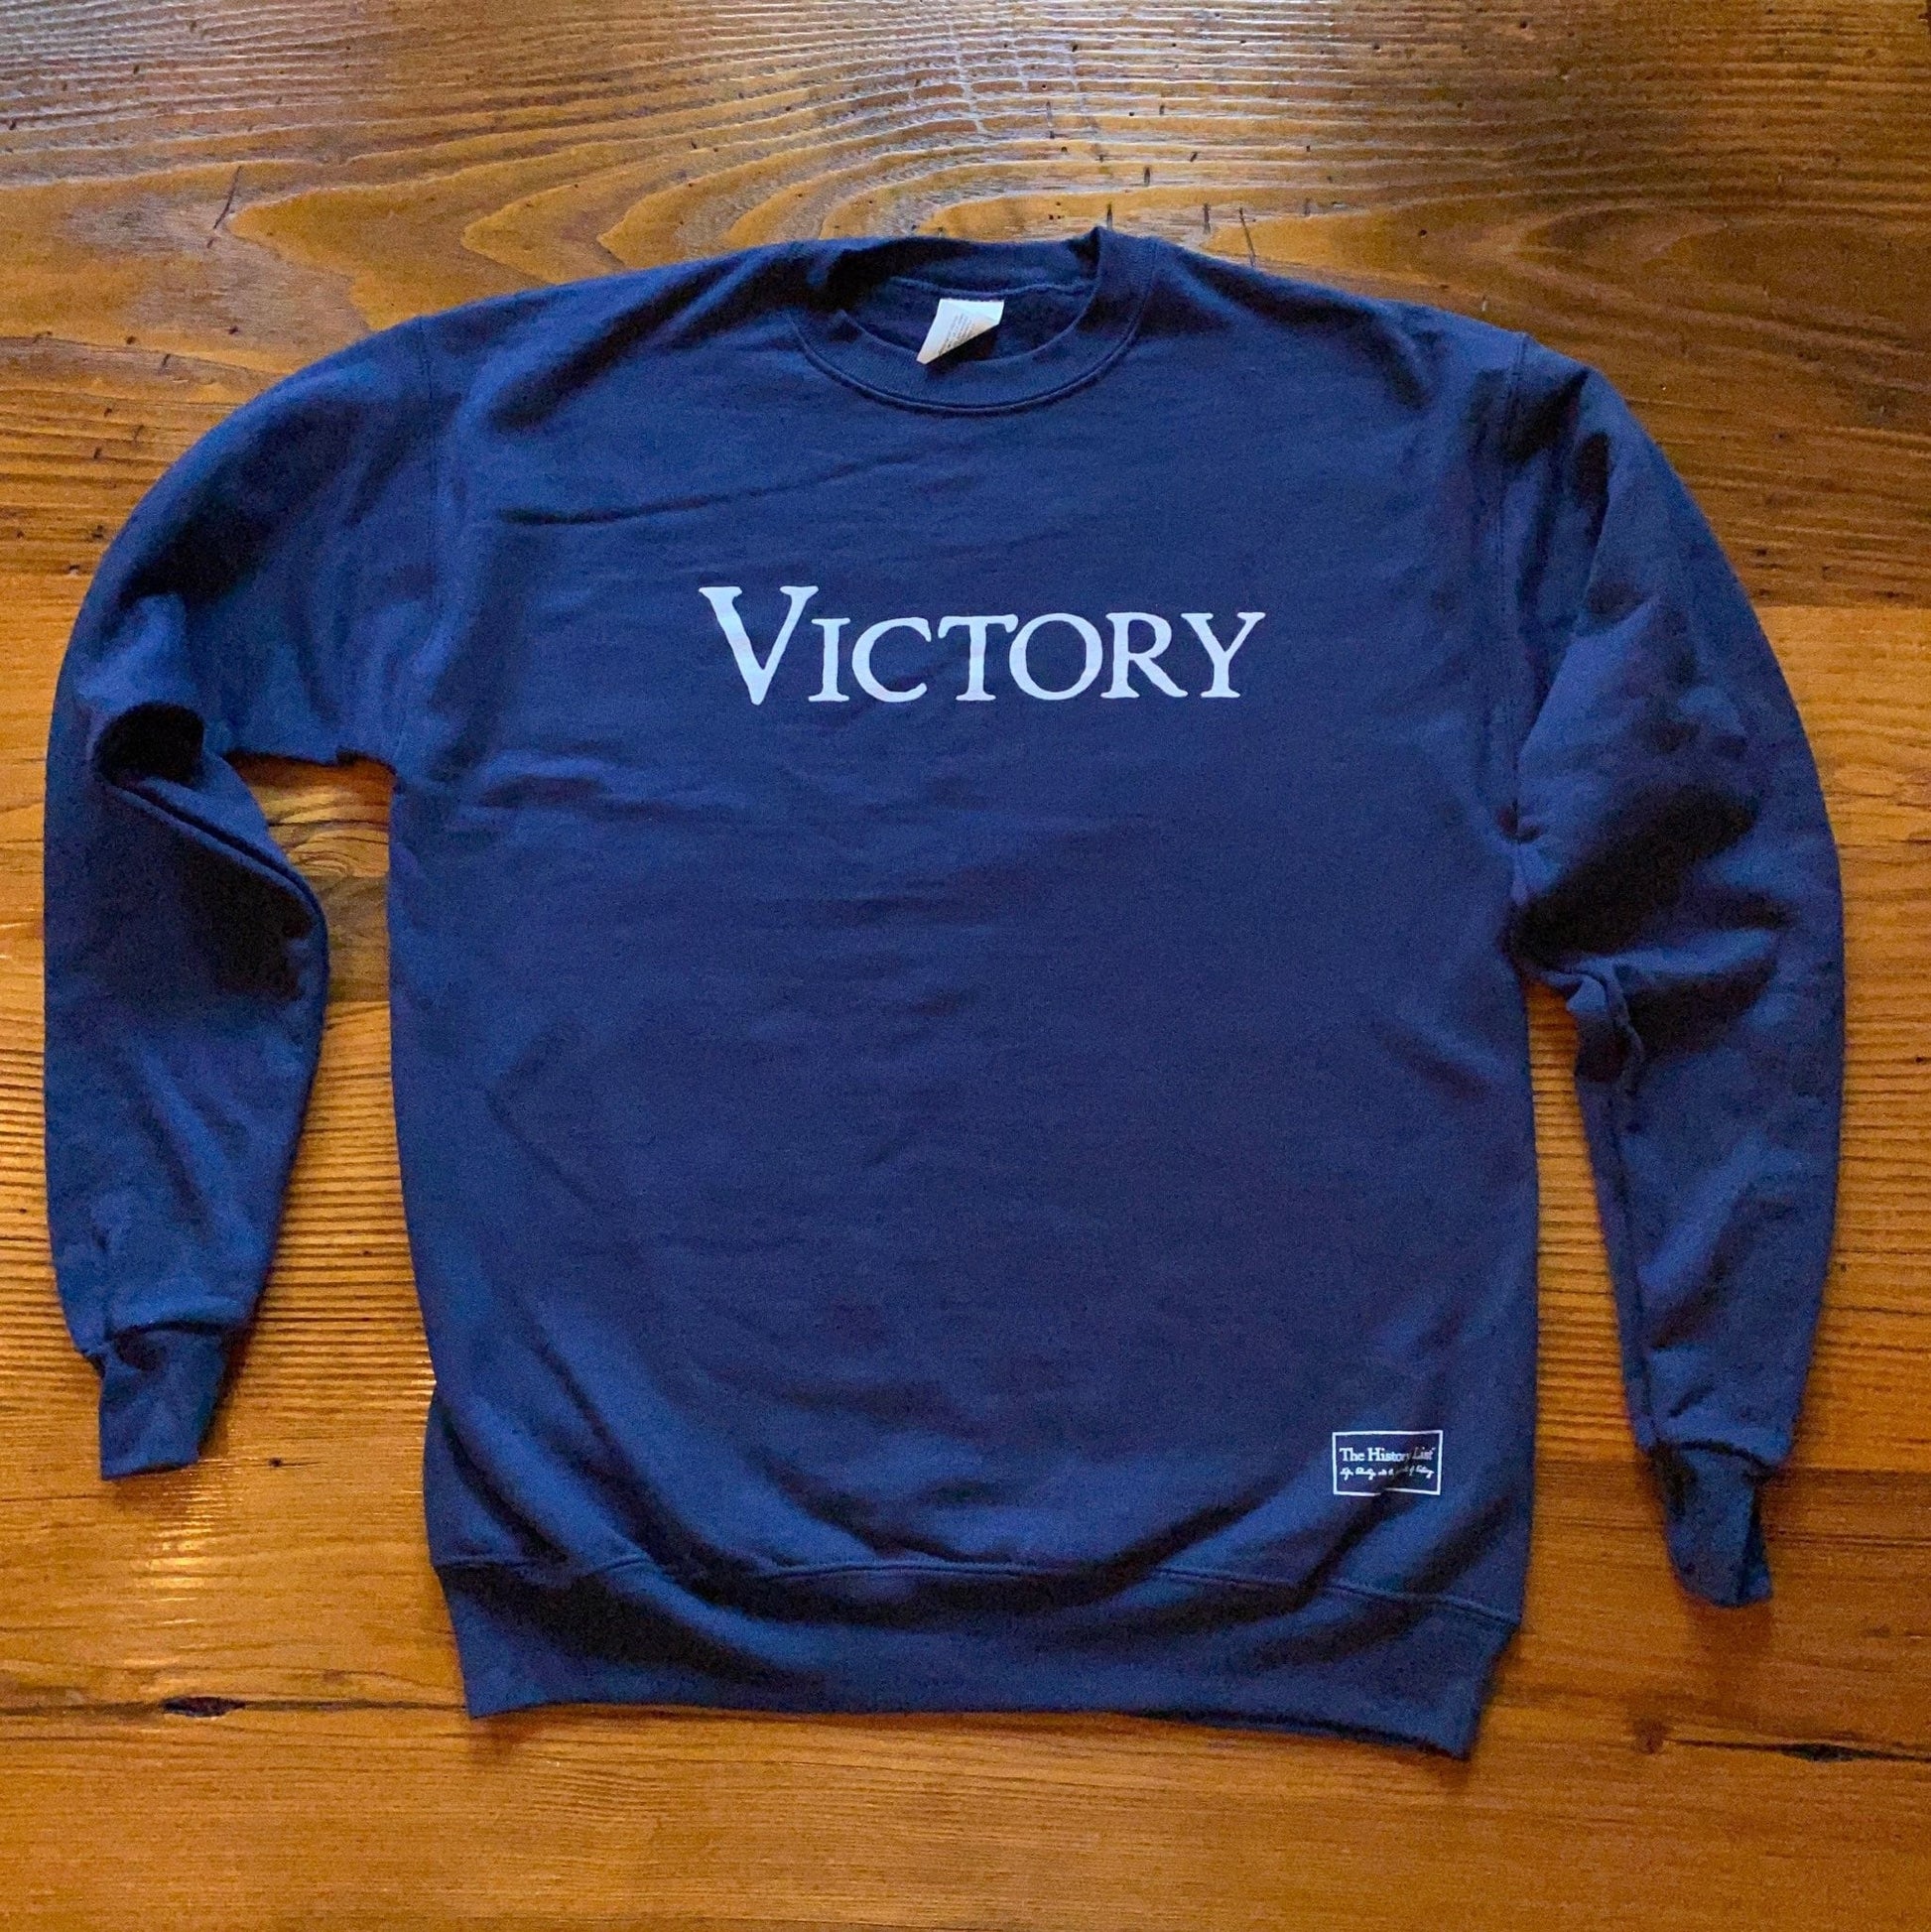 "Victory" crewneck sweatshirt from the History List Store